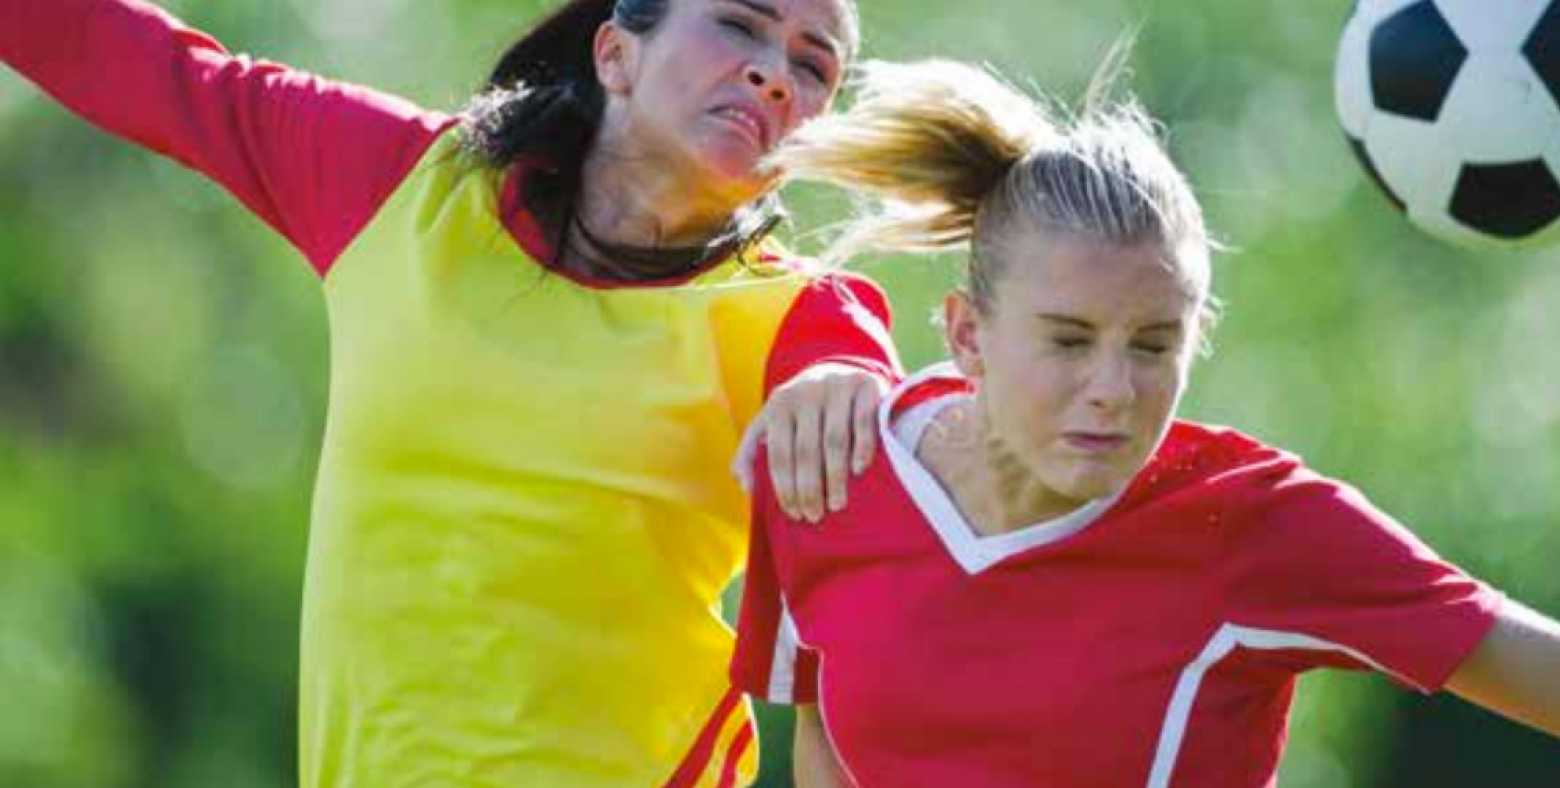 Two women going for a header in a soccer game